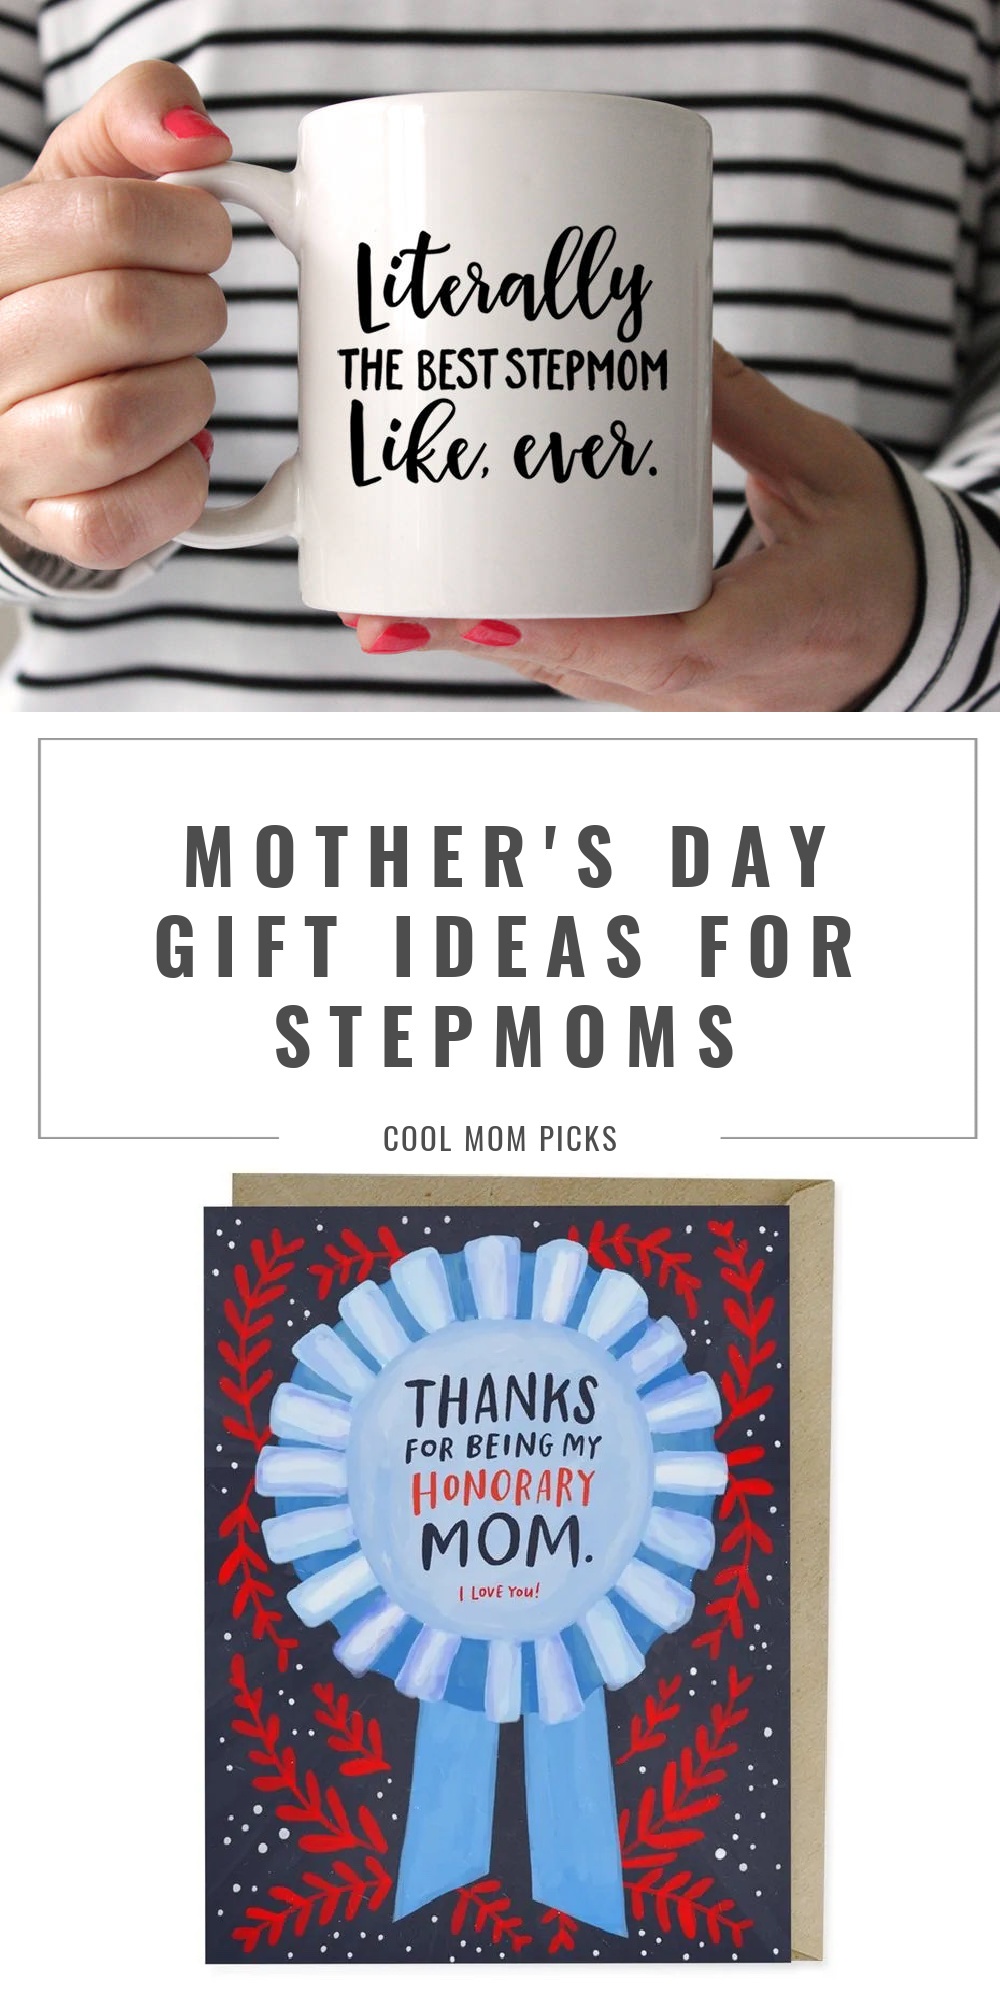 Wonderful Mother's Day gift ideas for stepmoms